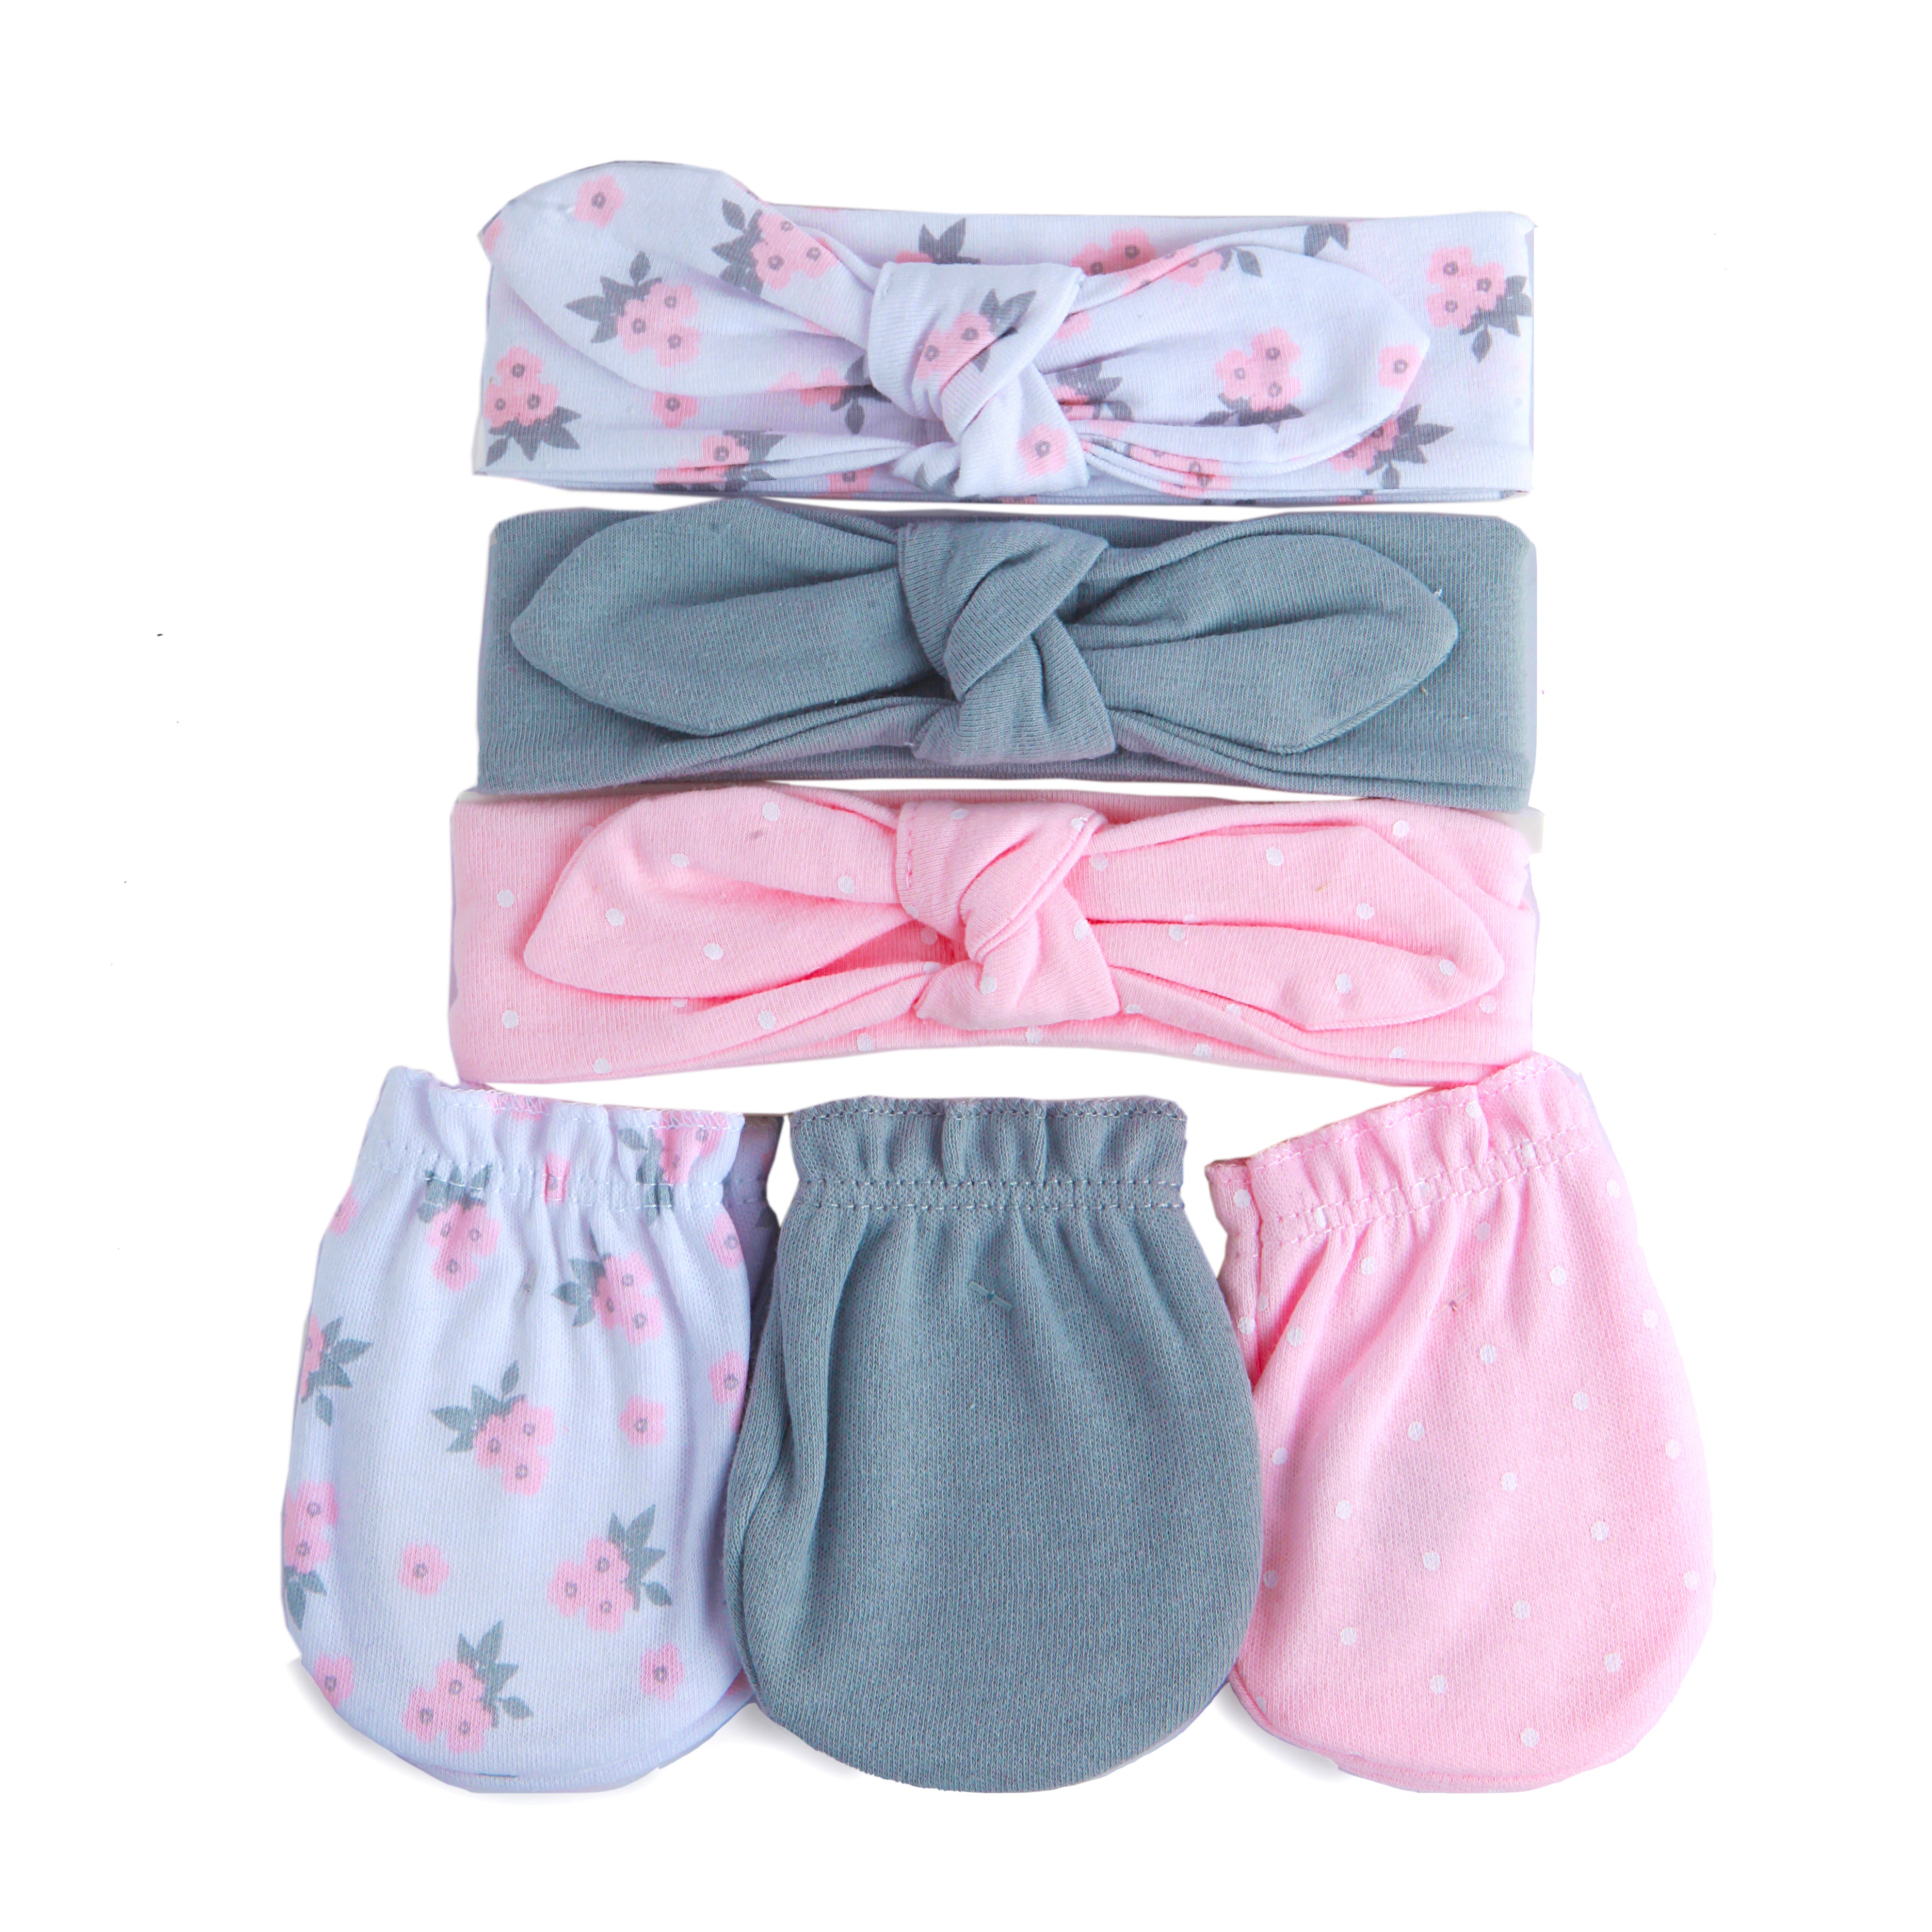 Matching Pink And Grey 3 Mittens And 3 Headbands Set - Baby Moo